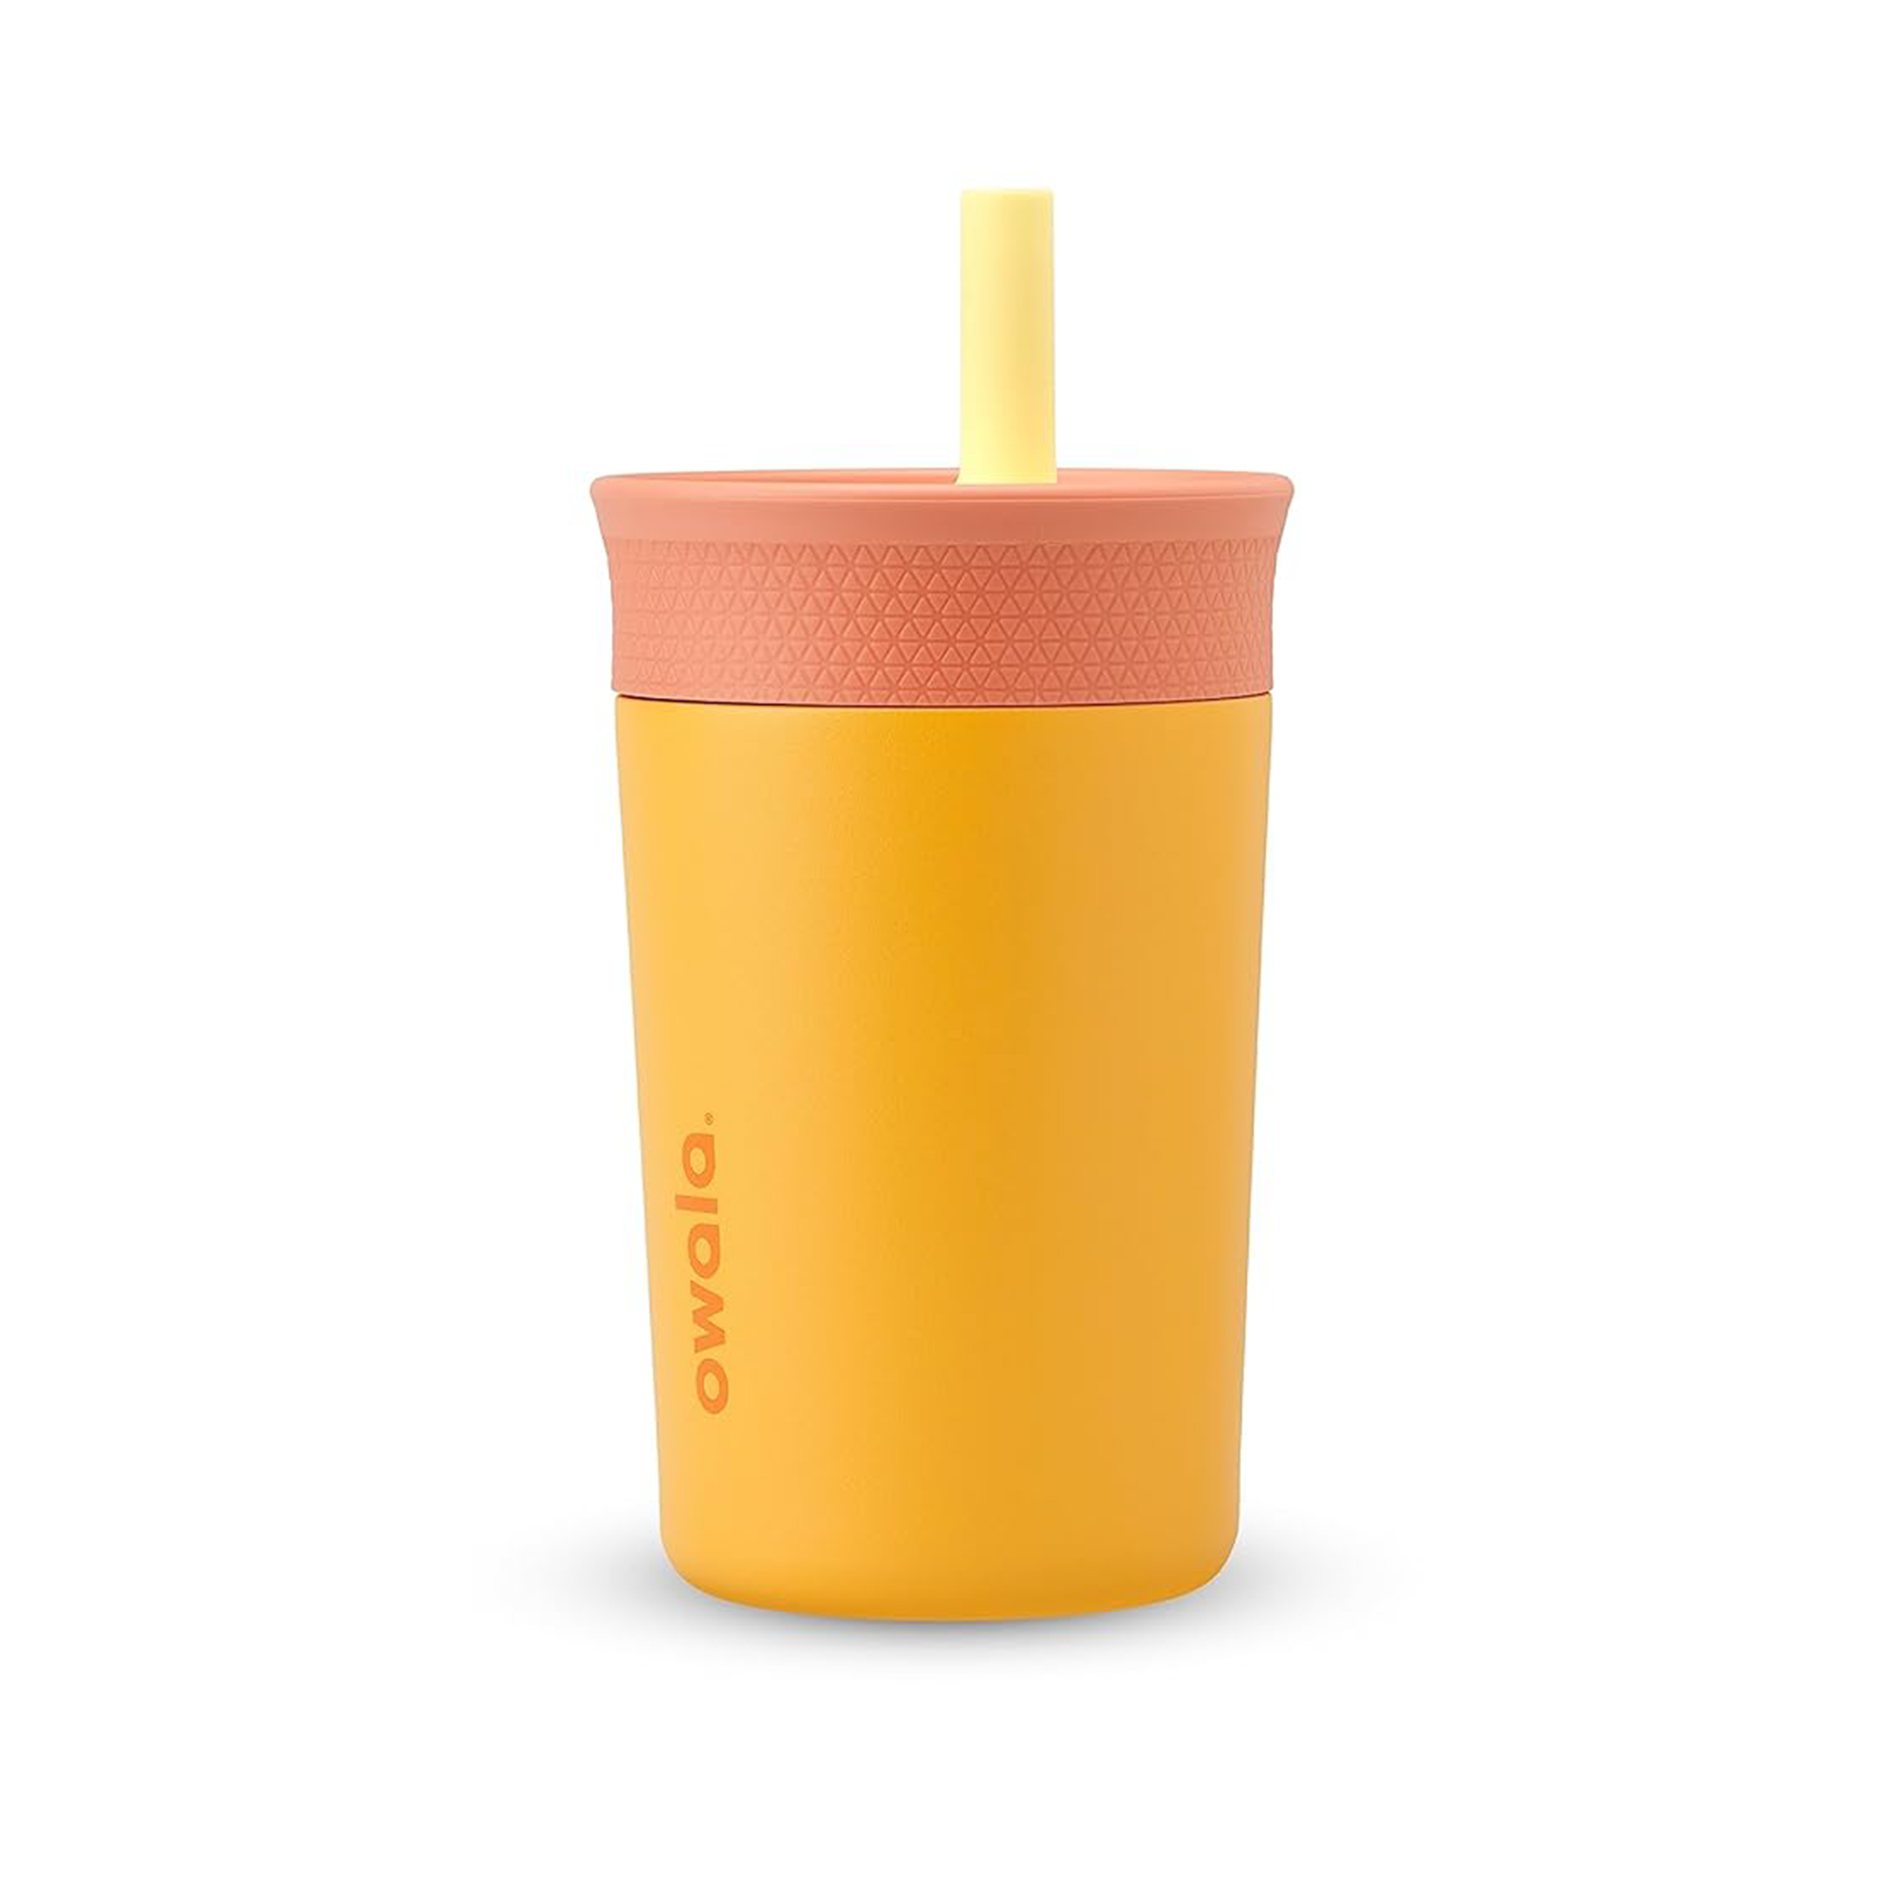 Kids Travel Straw Cup